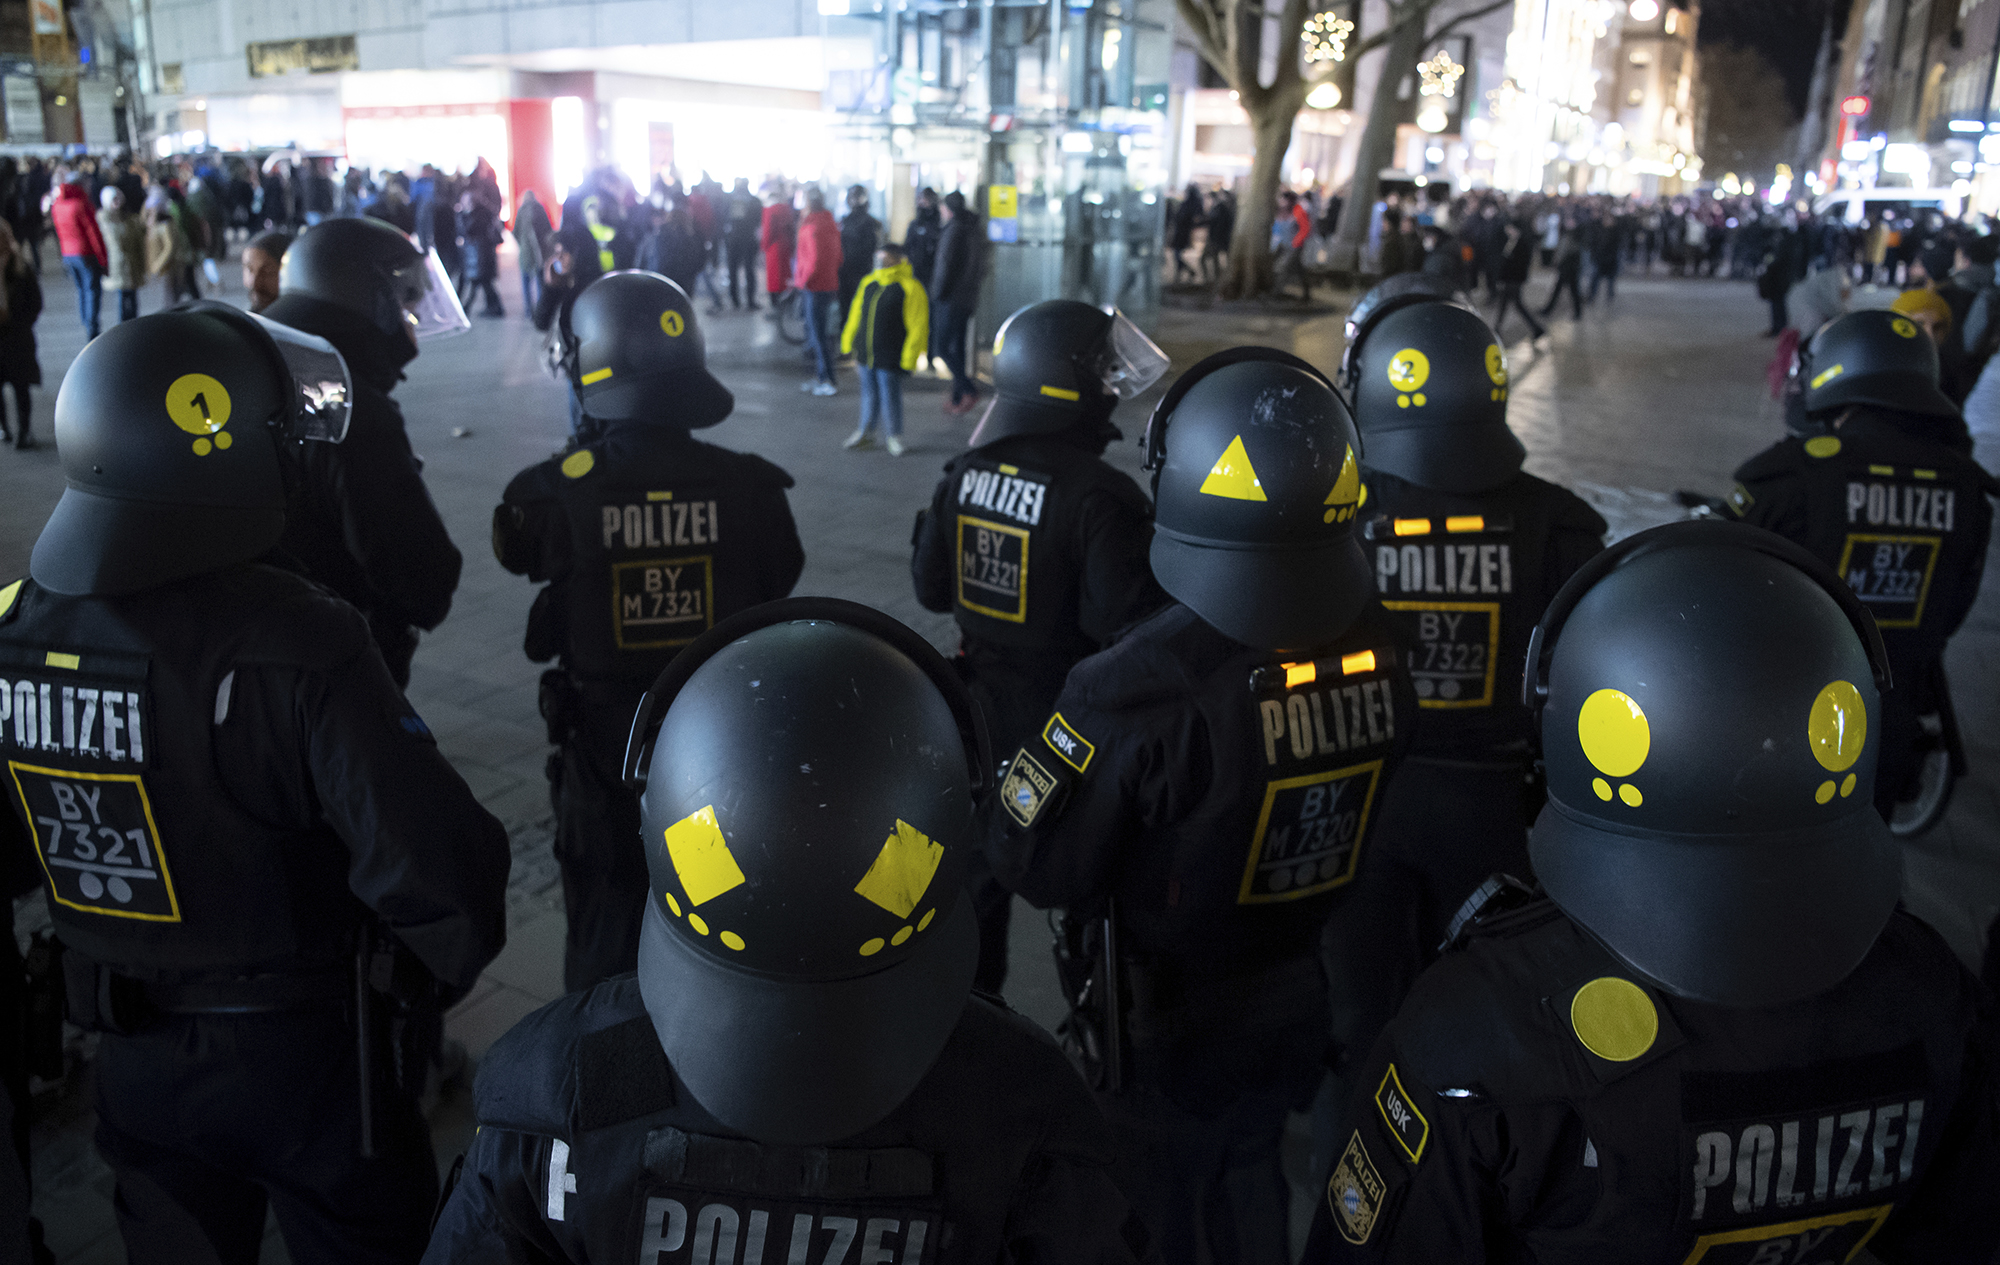 Police officers stand on the Marienplatz in Munich, Germany on Wednesday. Bavarian police are preparing for unannounced "walks" and gatherings of opponents of the state's pandemic measures in numerous municipalities. 